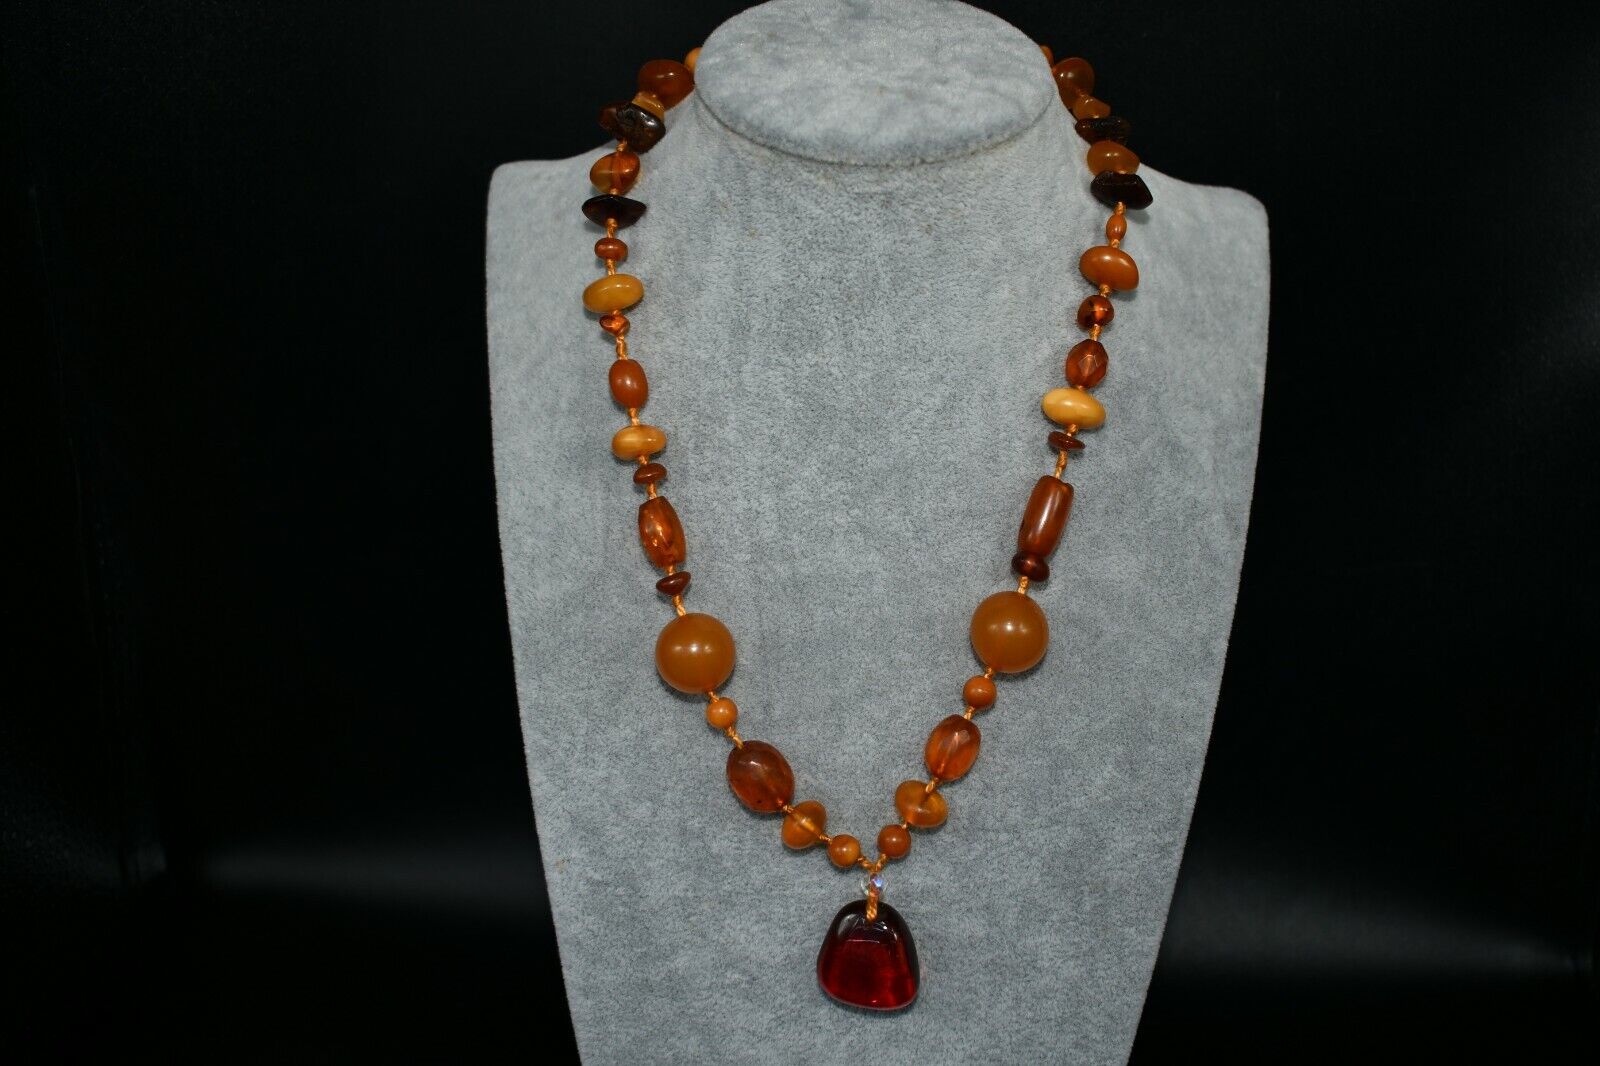 Beautiful Authentic Vintage Baltic Egg Yolk Amber Necklace Weighing 20.0 Grams